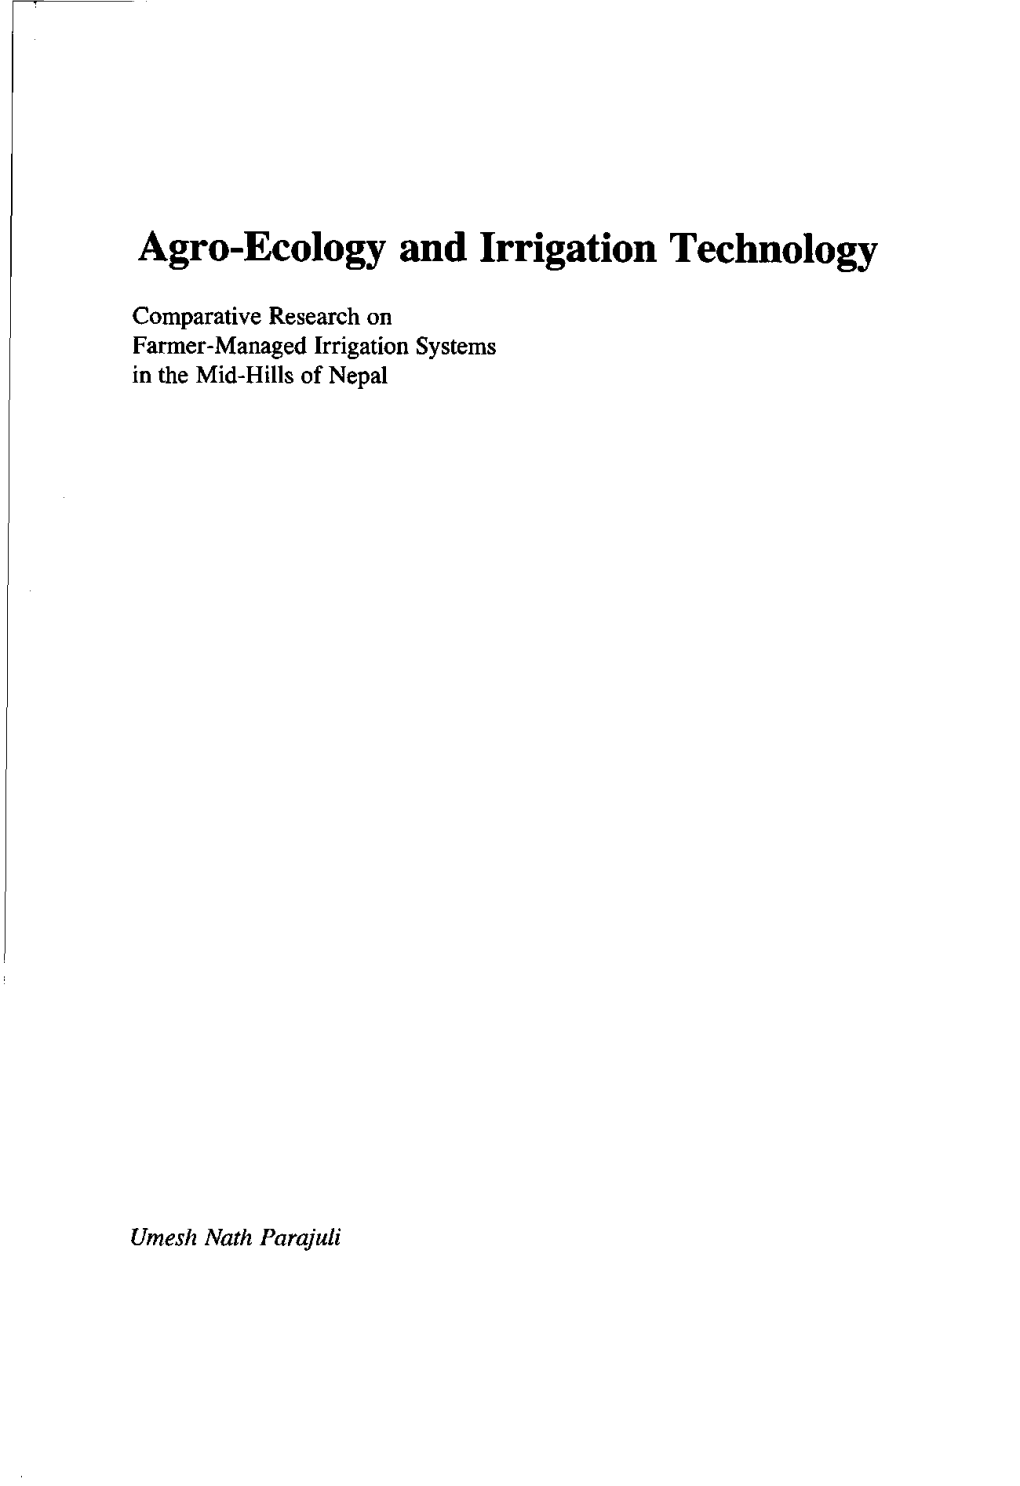 Agro-Ecology and Irrigation Technology